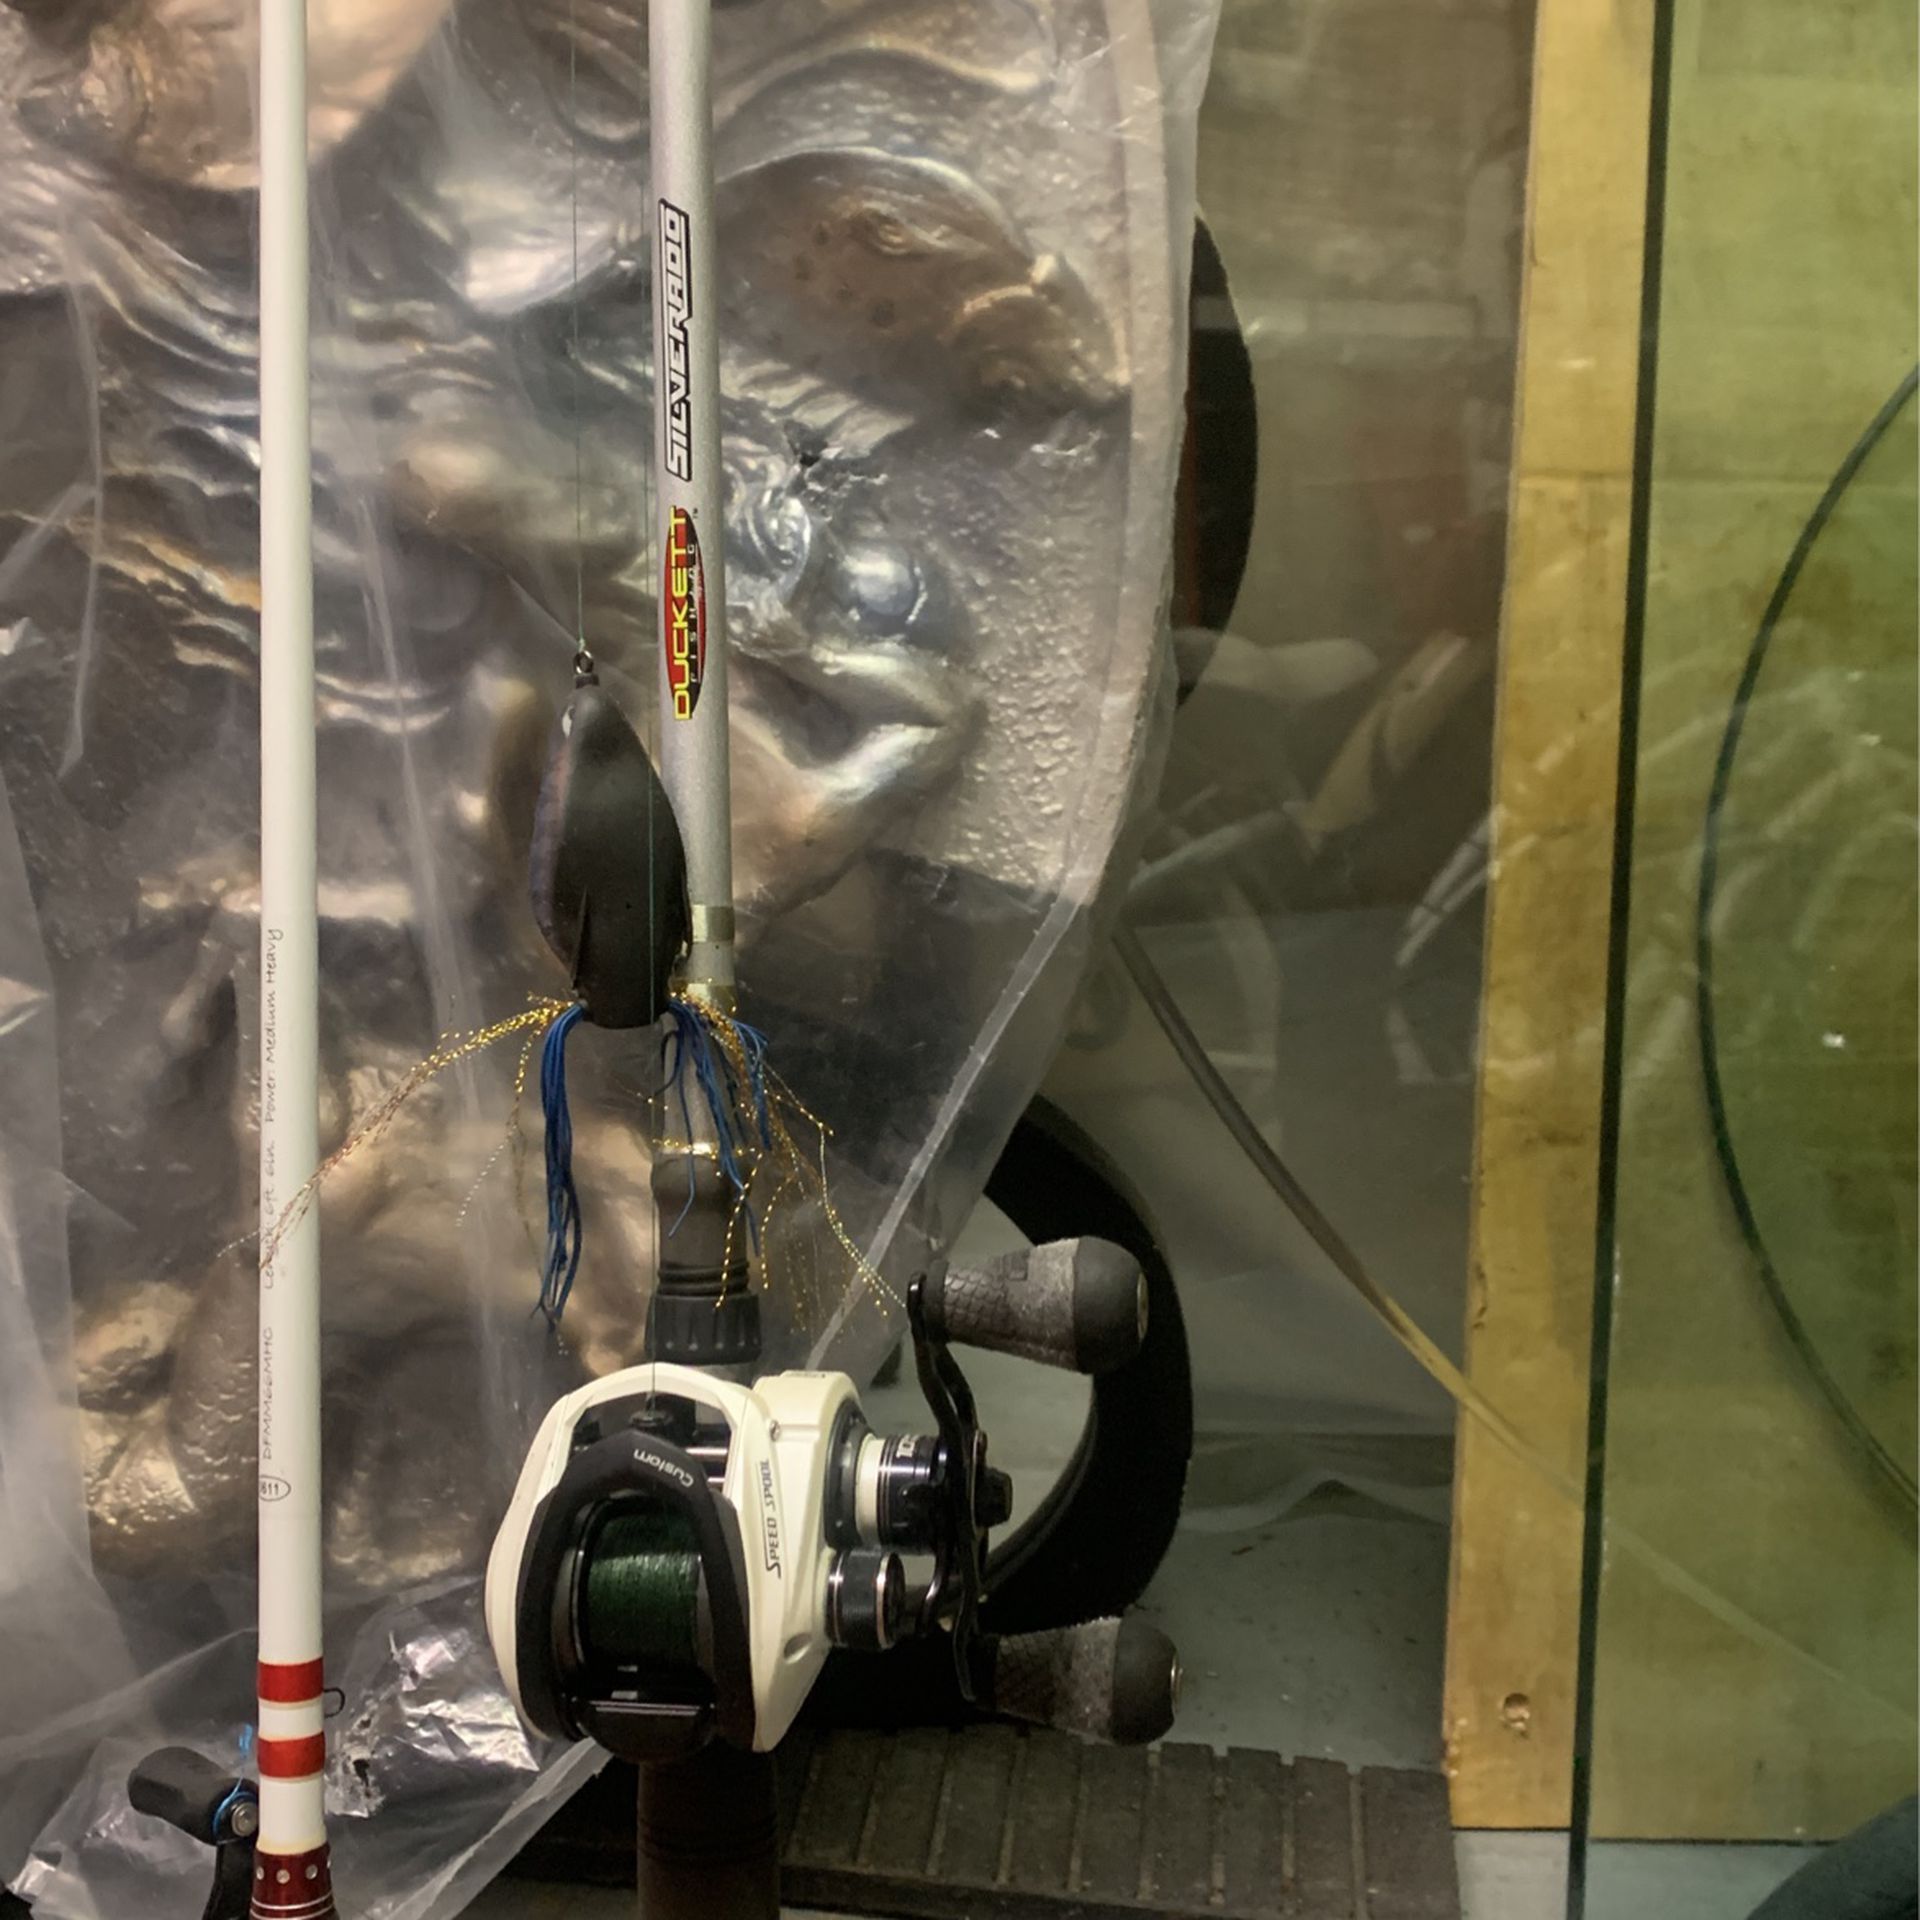 Lews XSJ-10 Spinning Reel And Fishing Rod Combo for Sale in Orlando, FL -  OfferUp